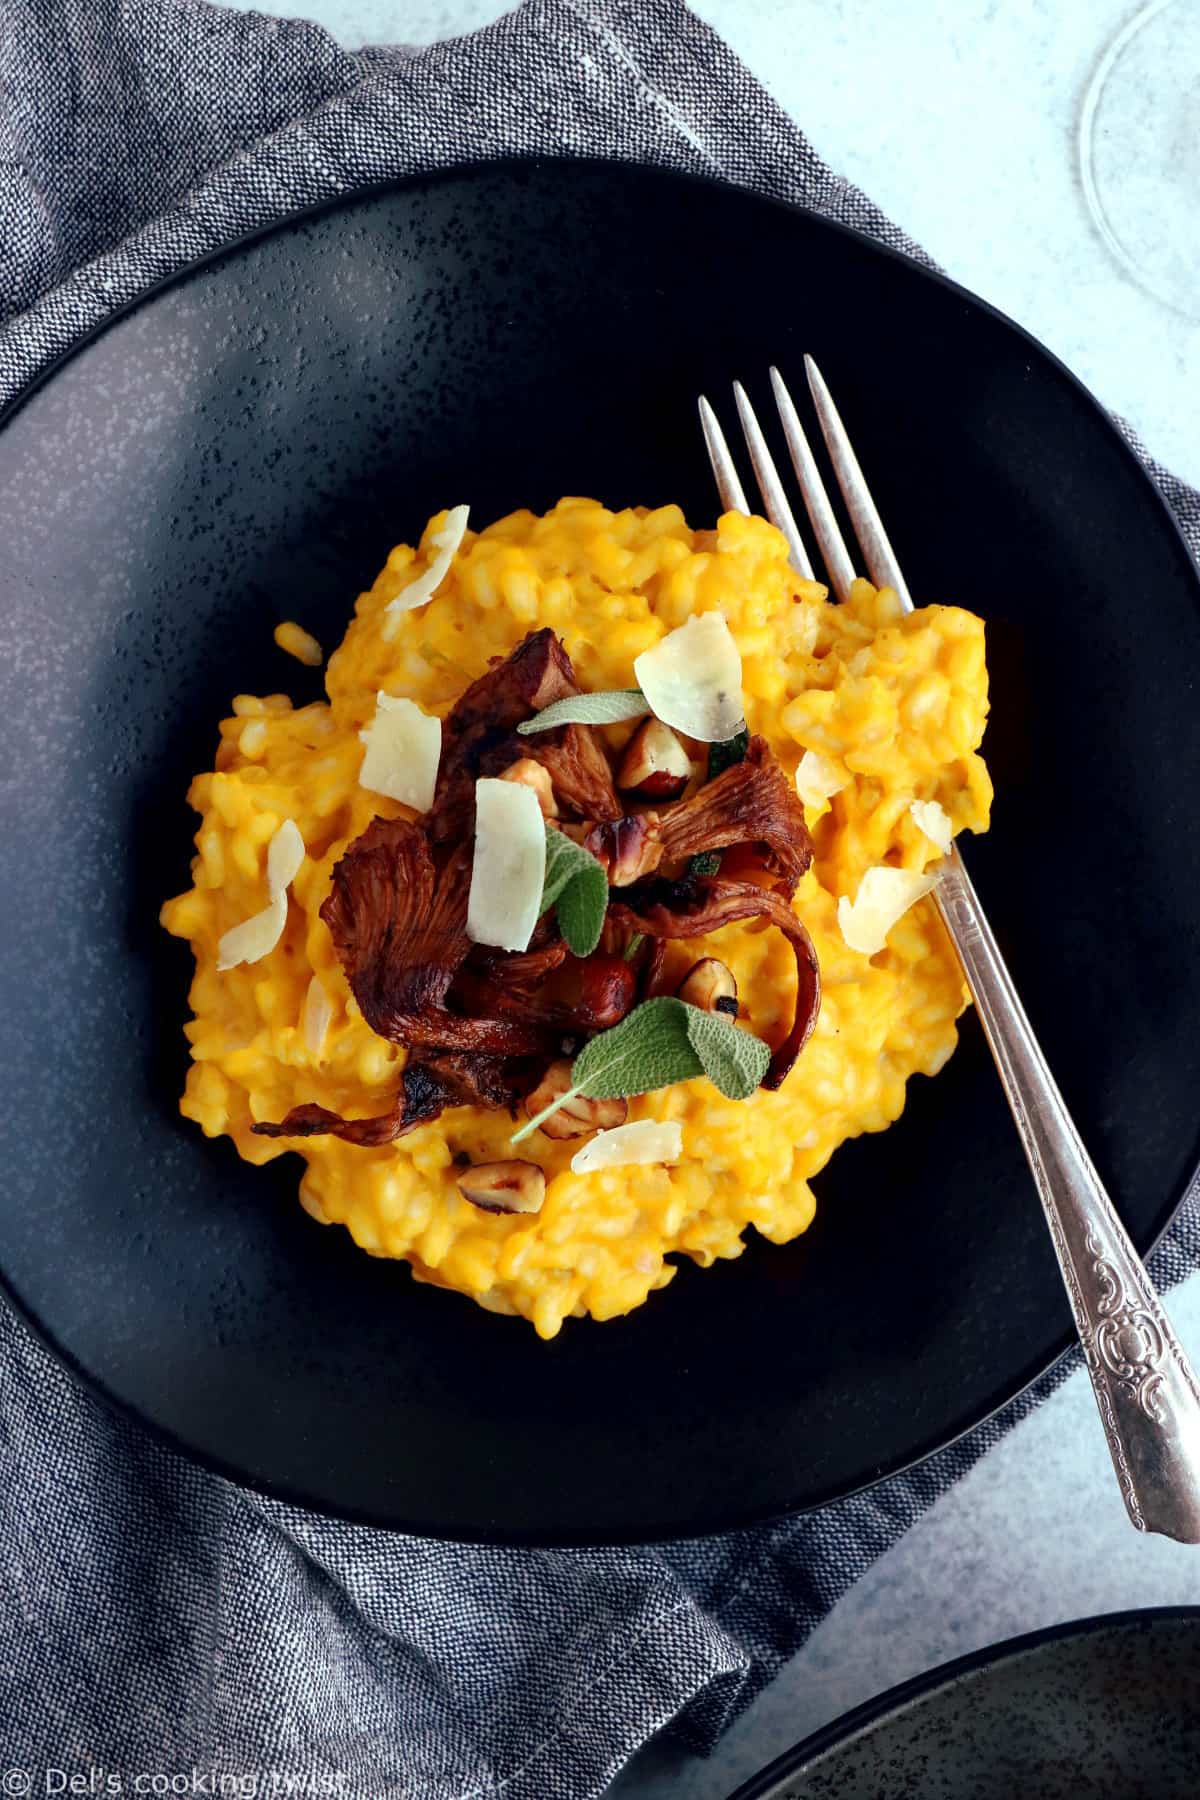 Butternut squash risotto is easy to prepare and packed with warm, hearty and cozy fall flavors. Serve it as is with sage for an everyday meal or top it with sautéed chanterelles mushrooms, toasted hazelnuts, and you get a fancy dish for Thanksgiving or any special occasion.